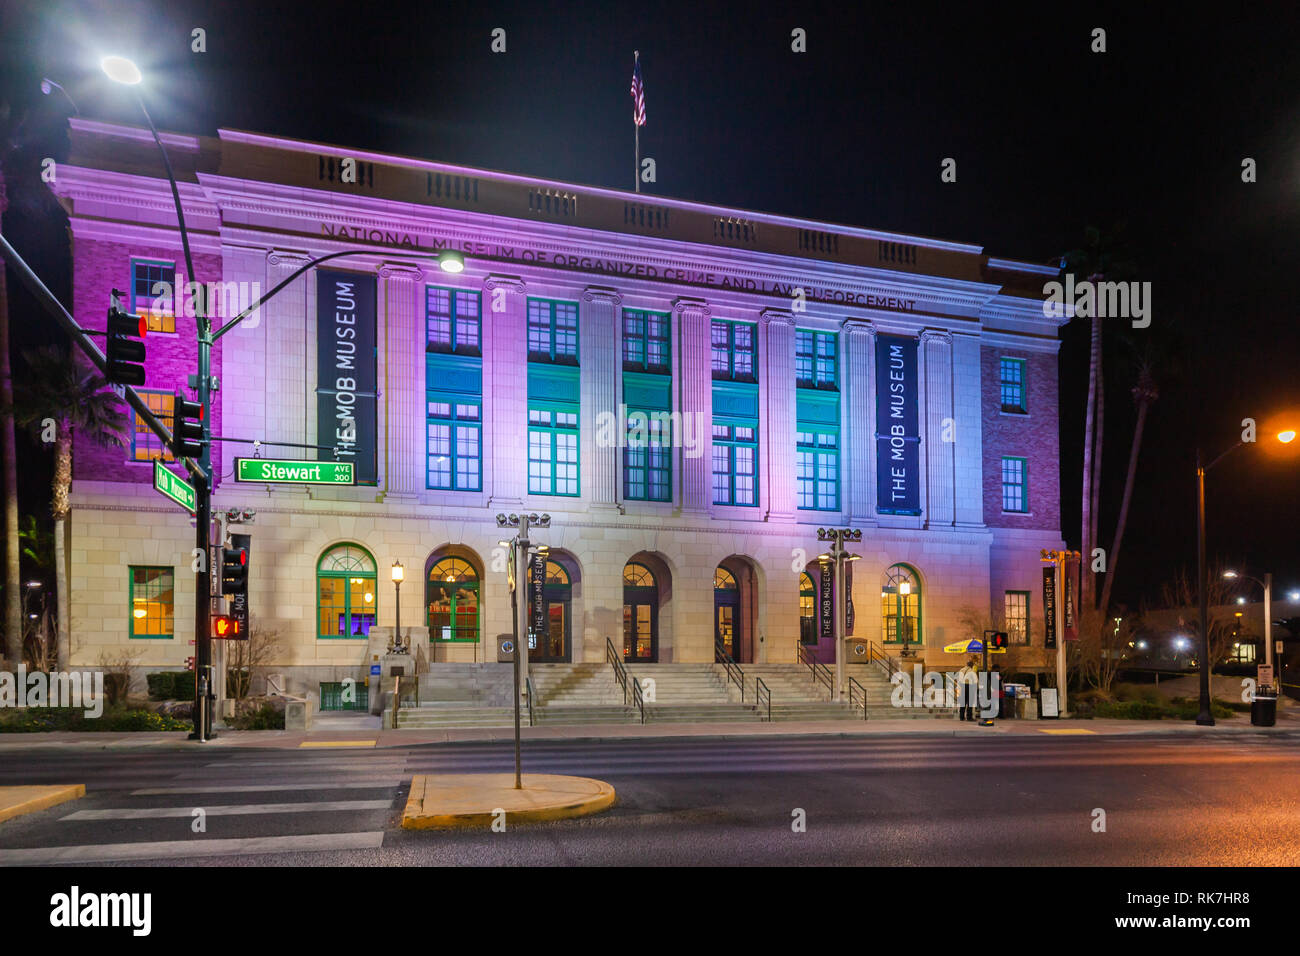 LAS VEGAS, NEVADA, USA - JANUARY 1ST, 2018: Night view of The Mob Museum, officially the National Museum of Organized Crime and Law Enforcement, Stock Photo